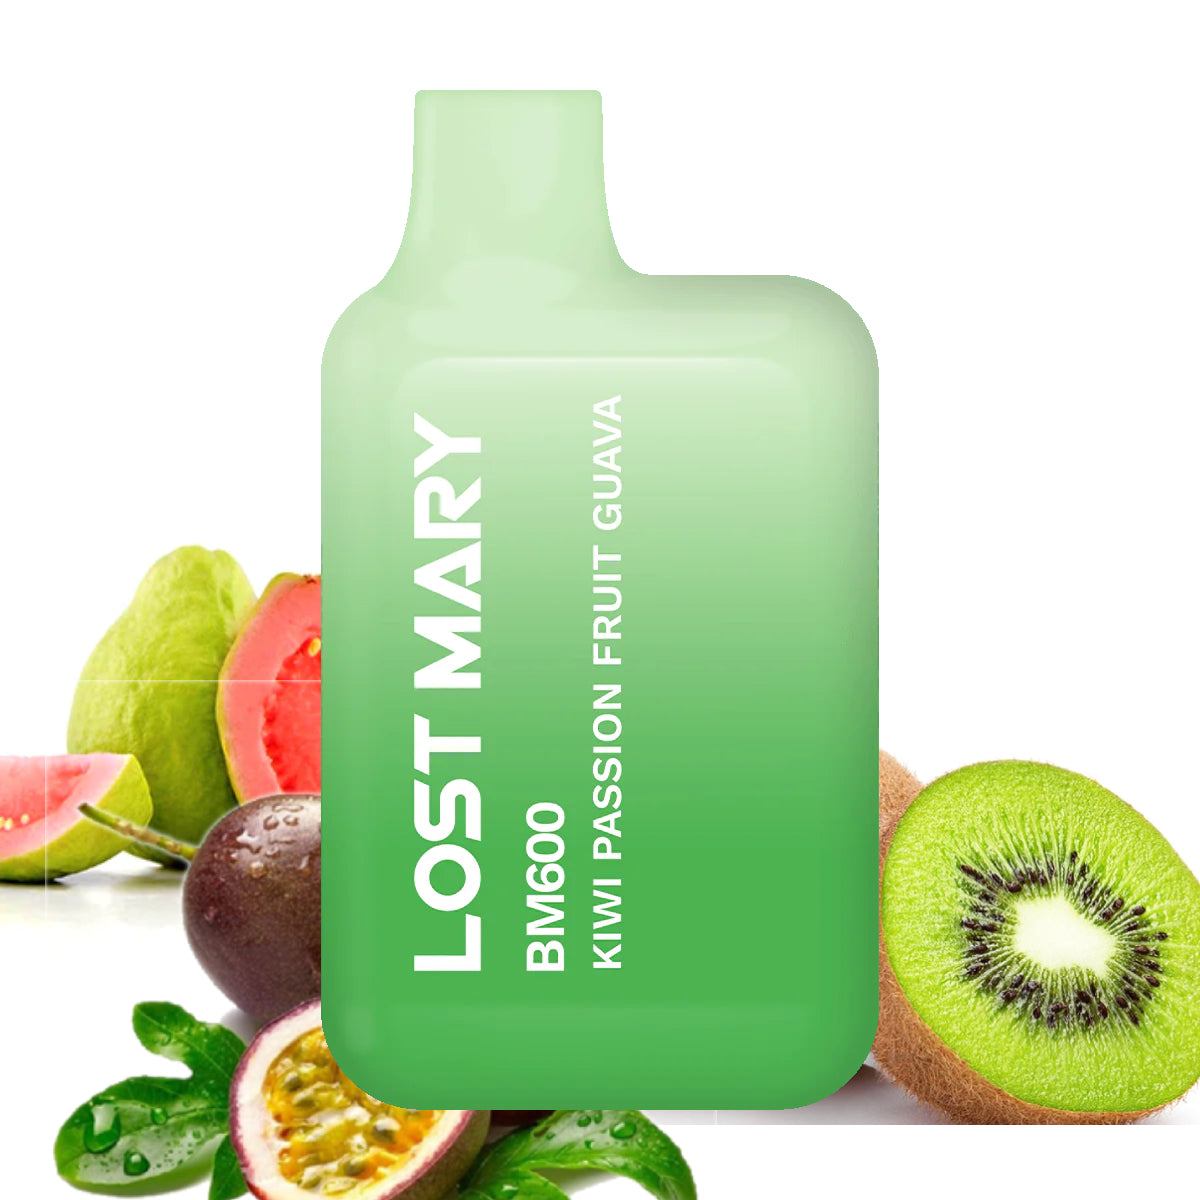 Lost Mary 2% Nicotine Disposable 600 Puffs Vape - Kiwi Passion Fruit Guava